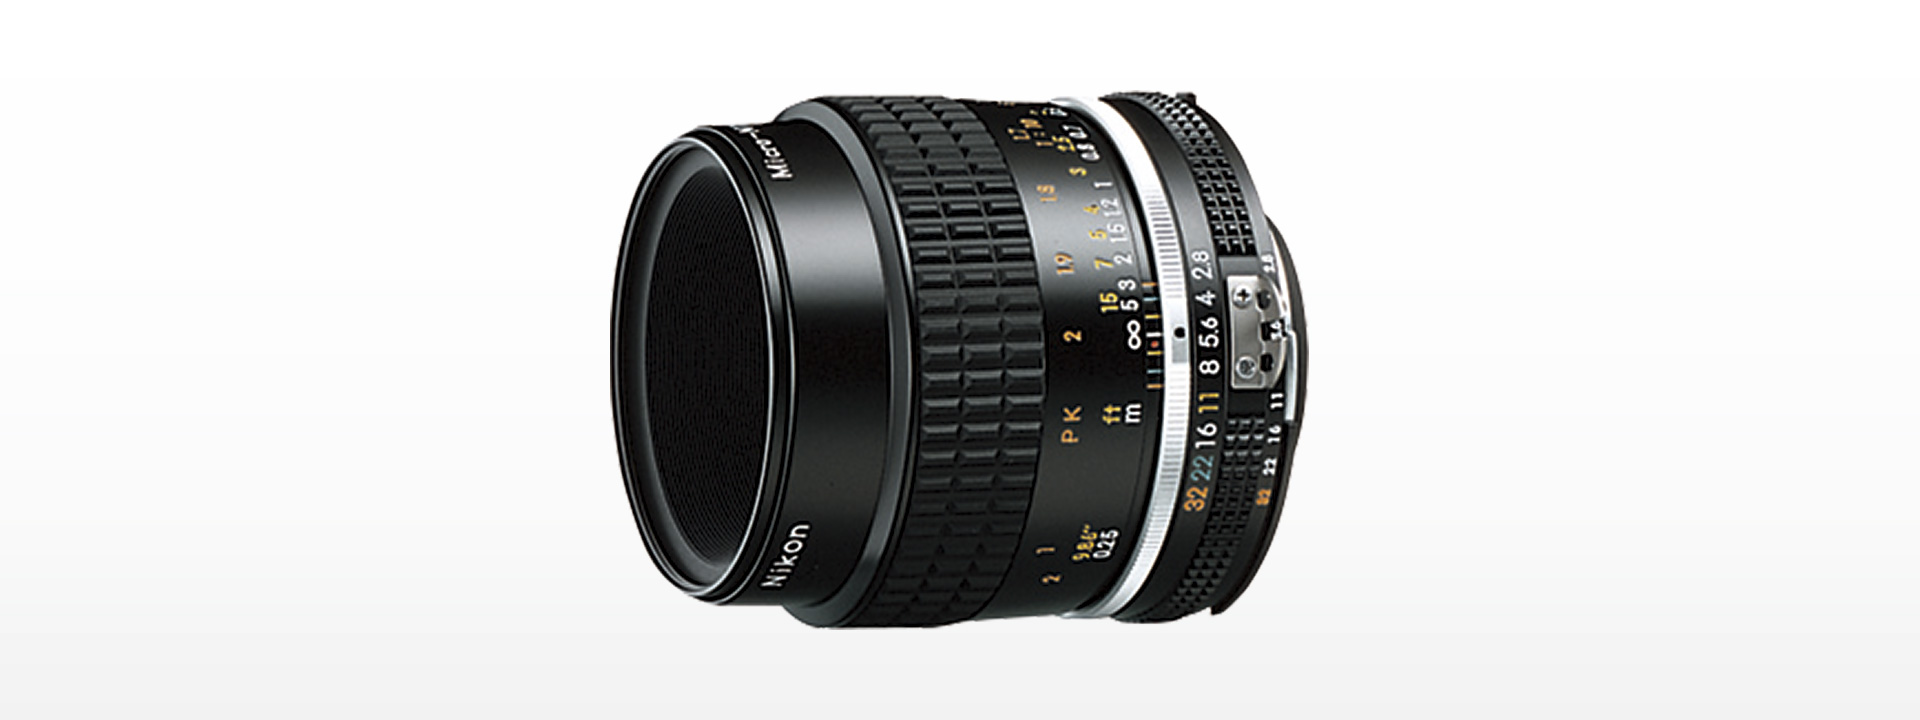 Nikon ニコン Ai-s Micro Nikkor 55mm f2.8